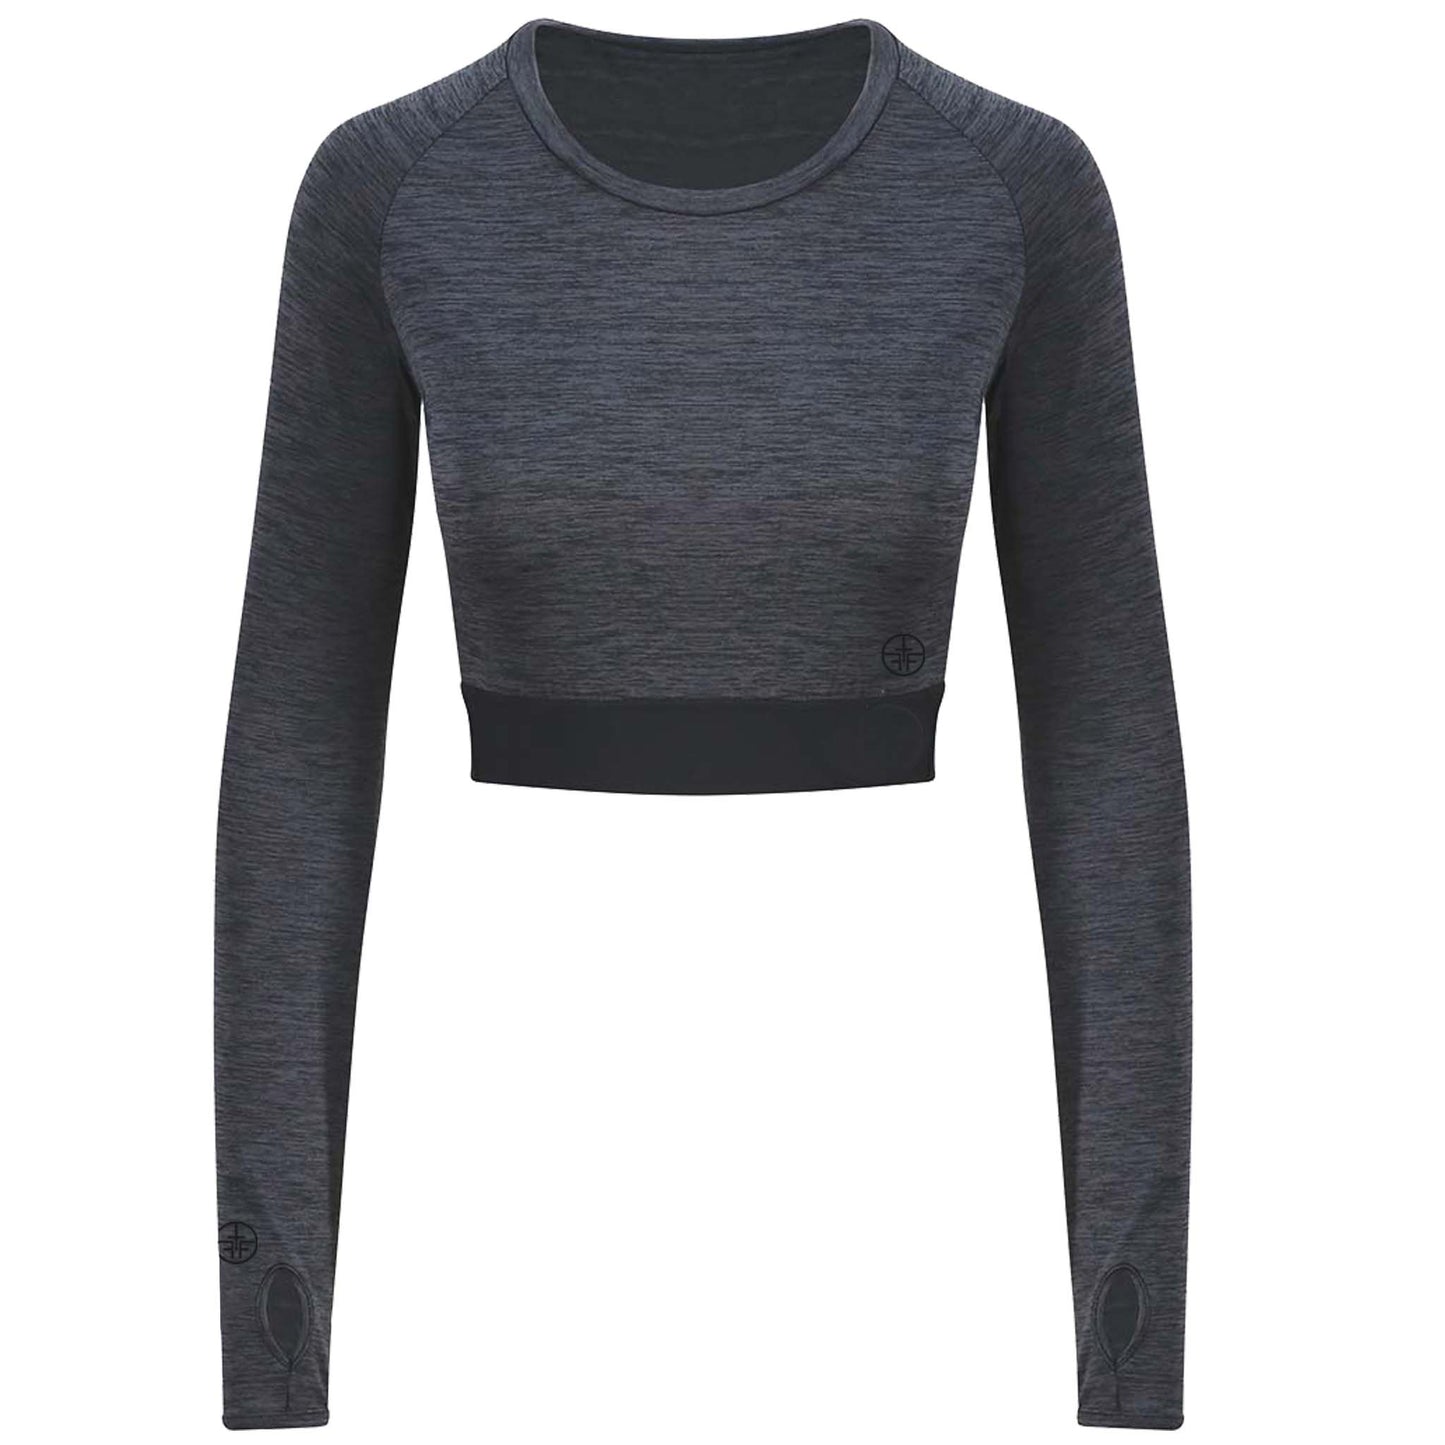 LUCY - "Cool" Technology Long Sleeved Crop Top - Charcoal